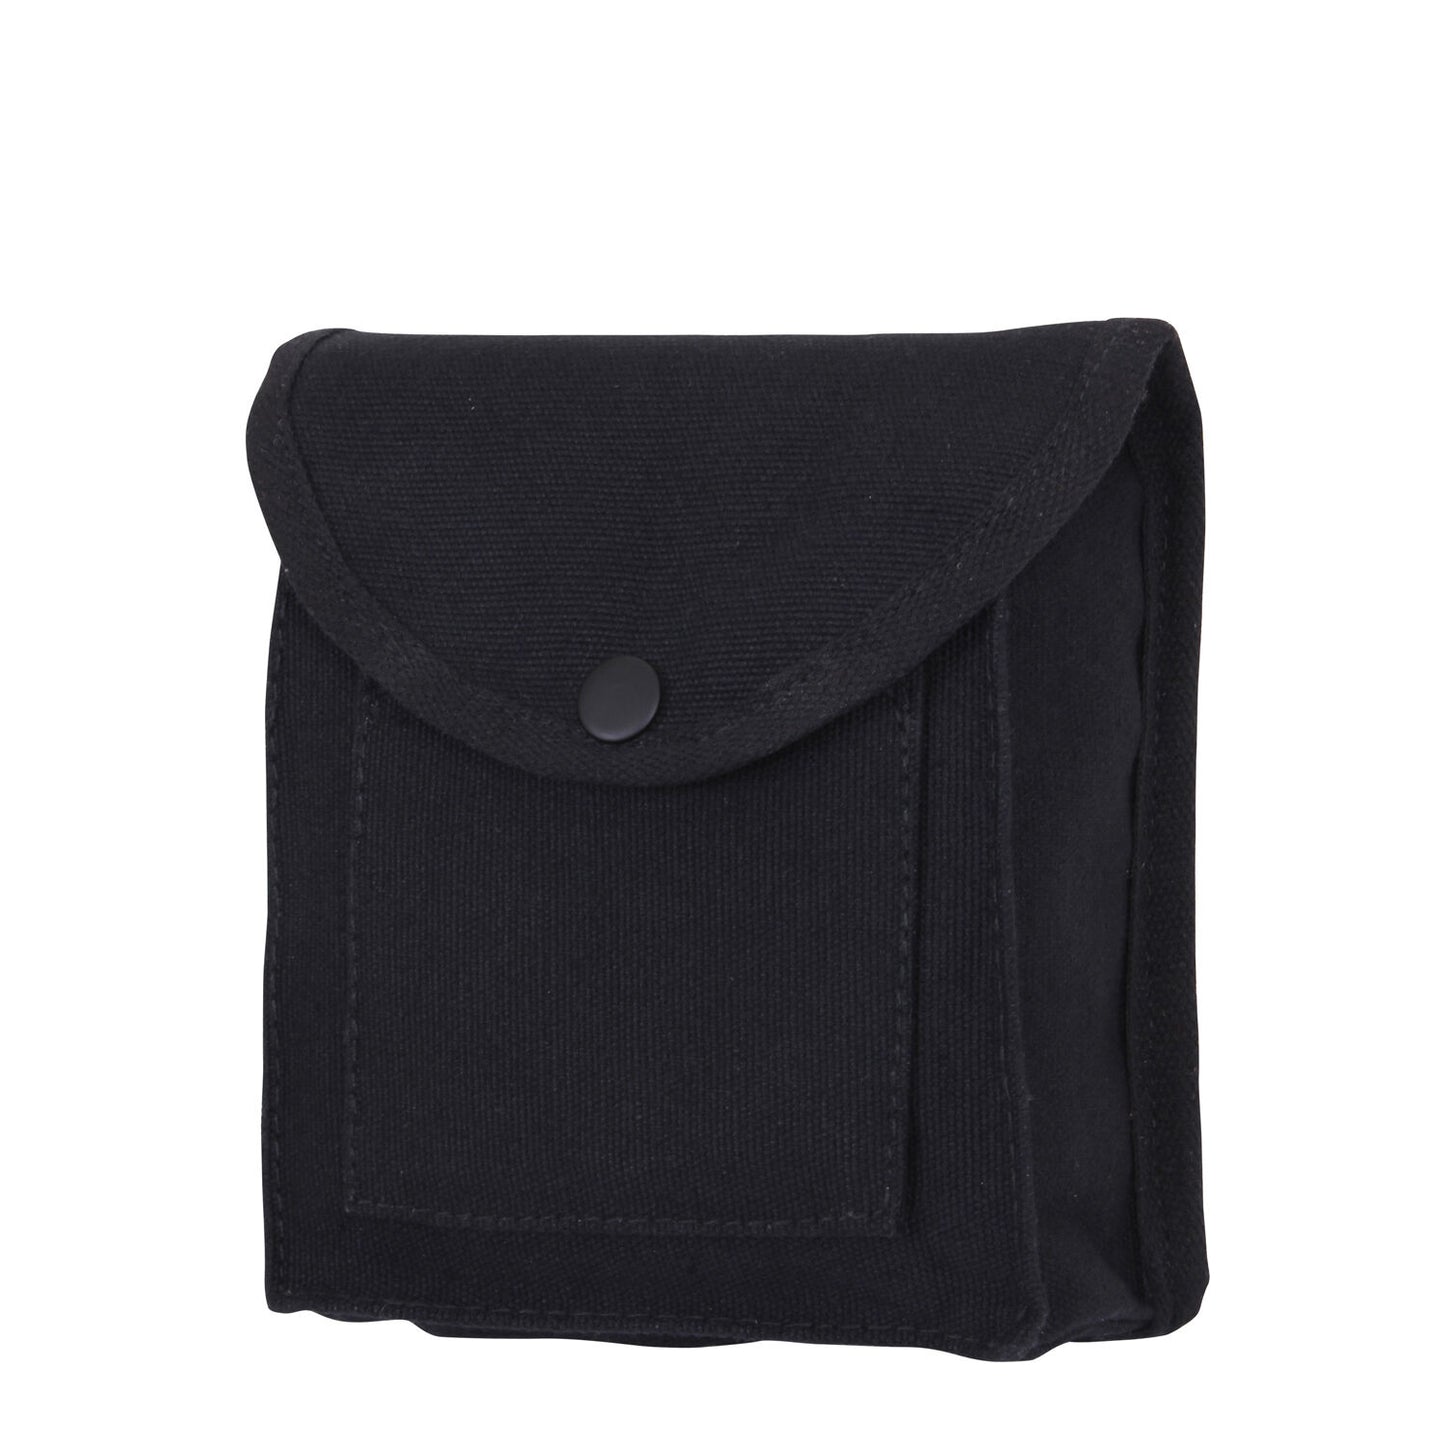 Rothco Canvas Utility Pouches